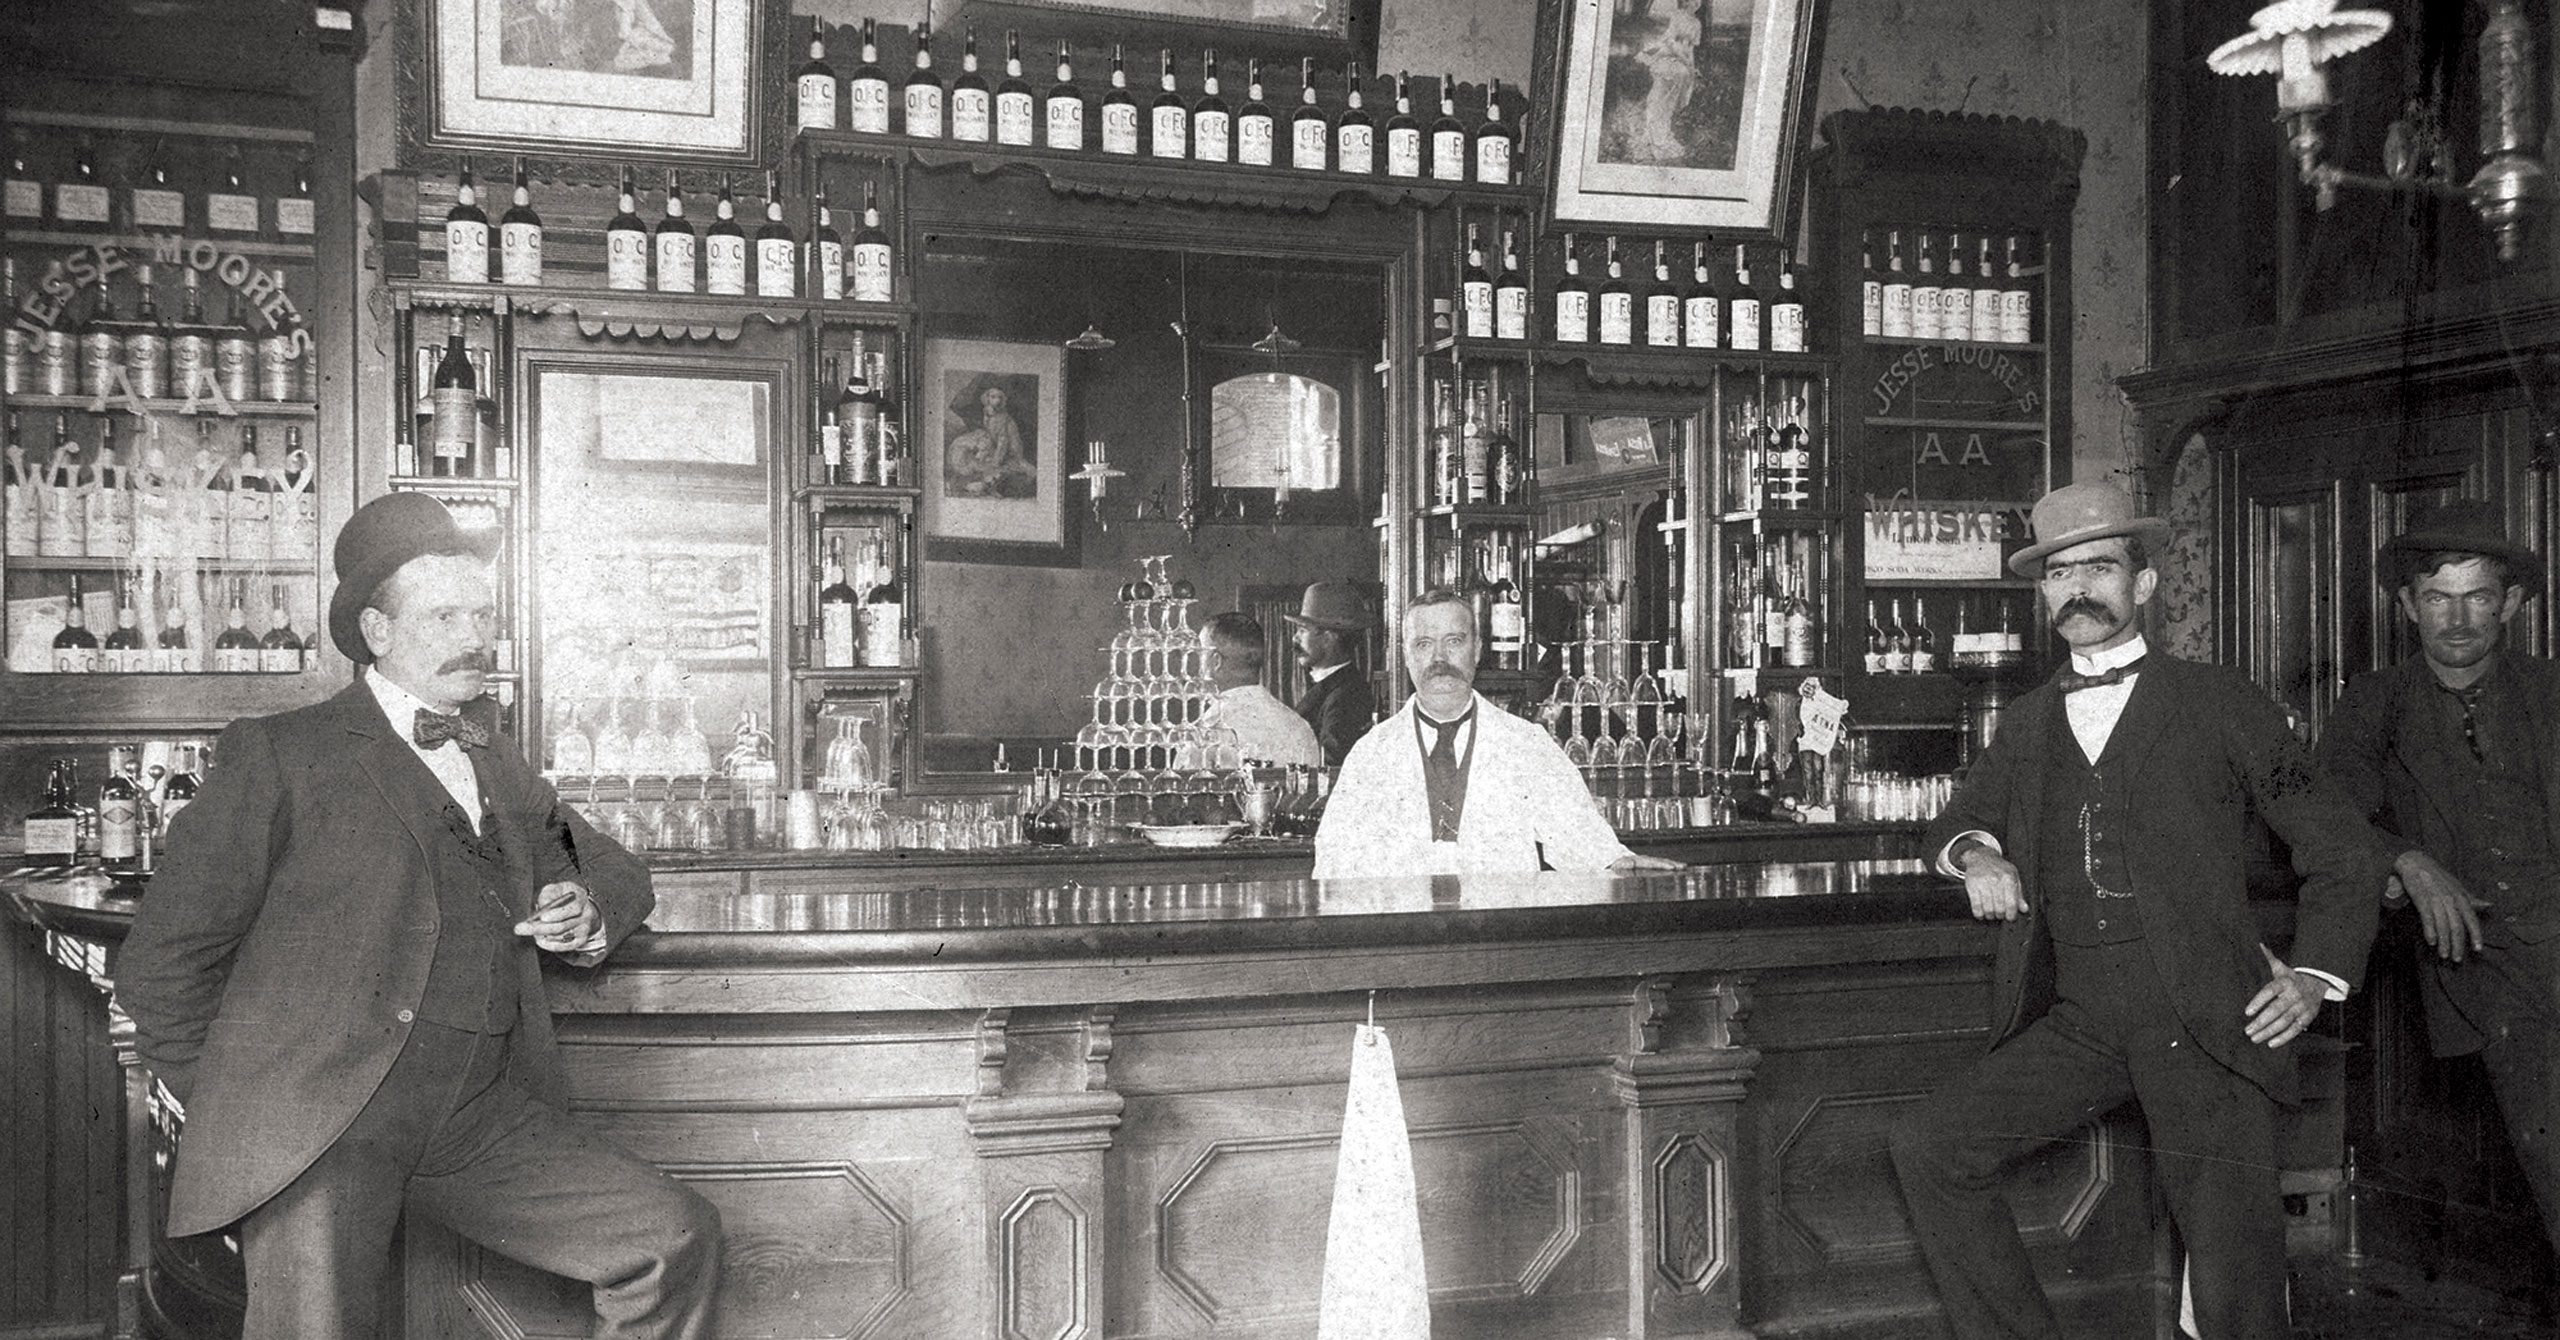 saloon with bar tender and patrons